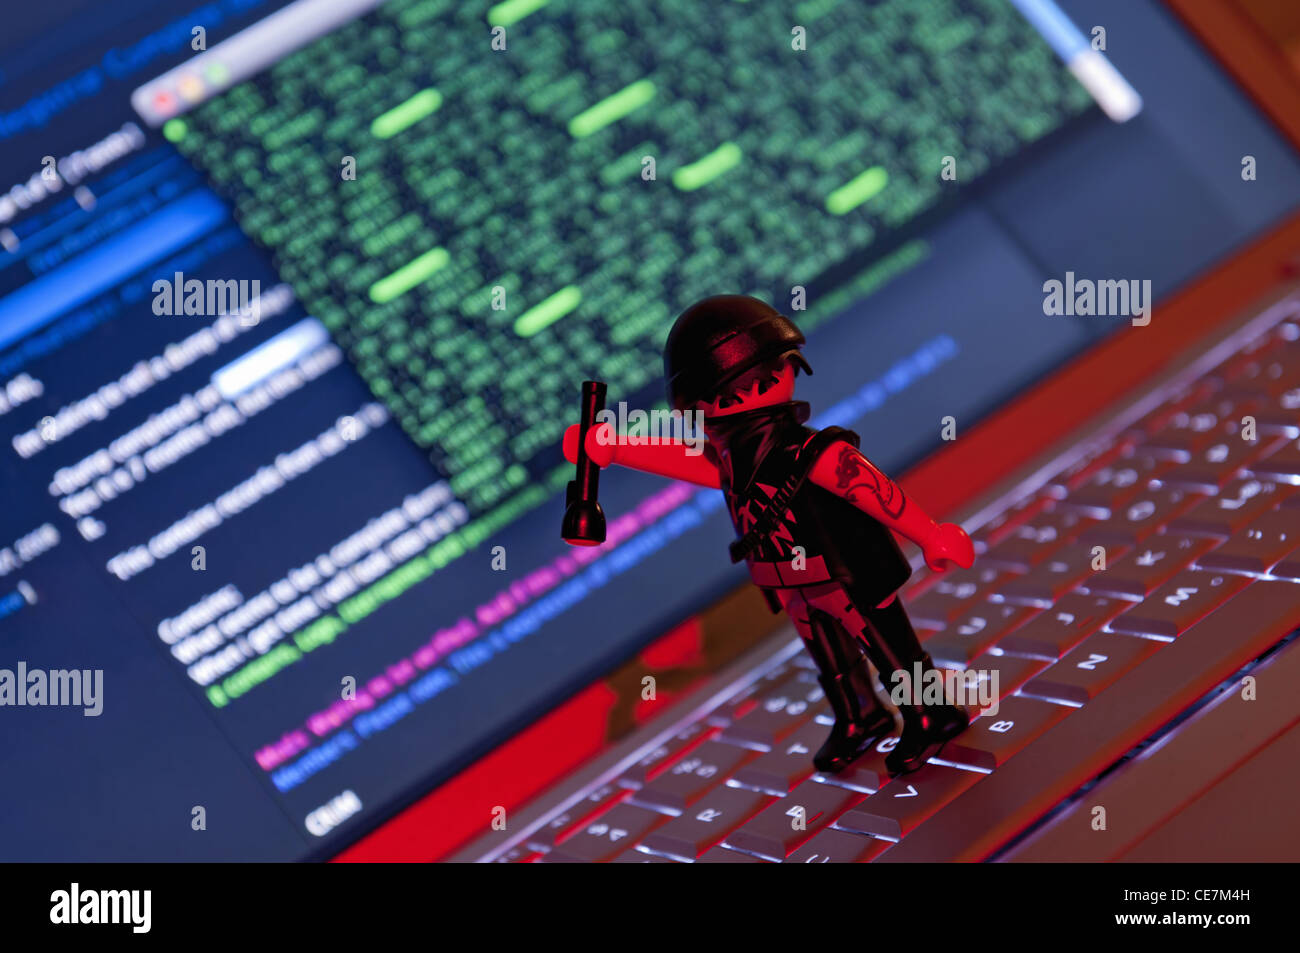 Playmobil Hacker dressed in dark clothing with torch about to steal information from laptop. Stock Photo